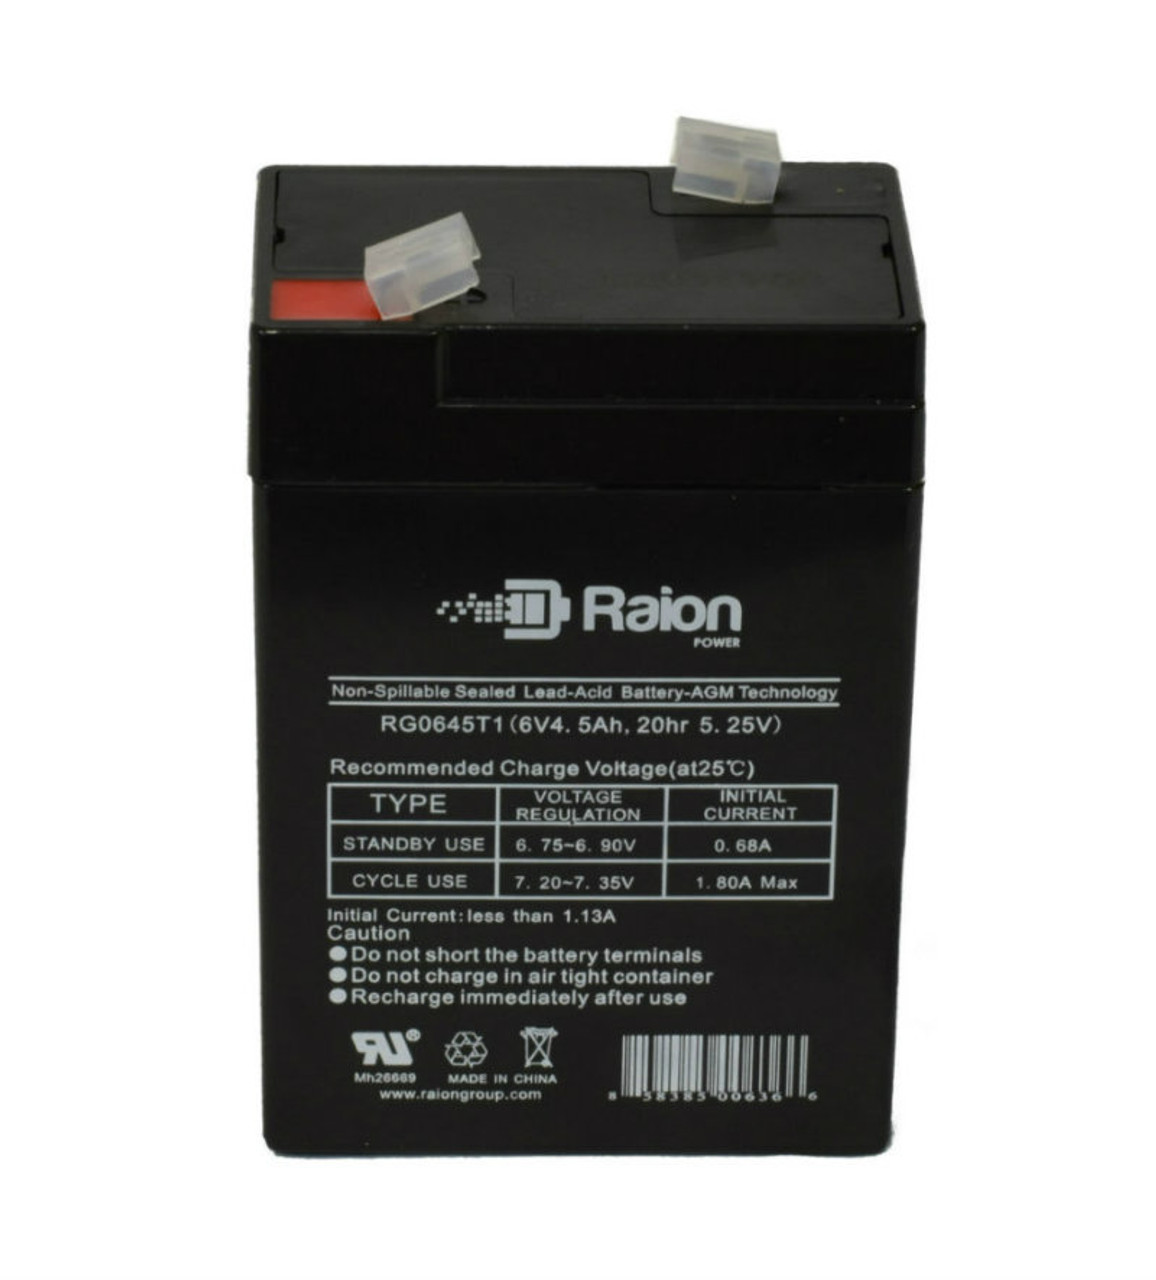 Raion Power RG0645T1 Replacement Battery Cartridge for Peg Perego IGED1080 6V Santa Fe Express